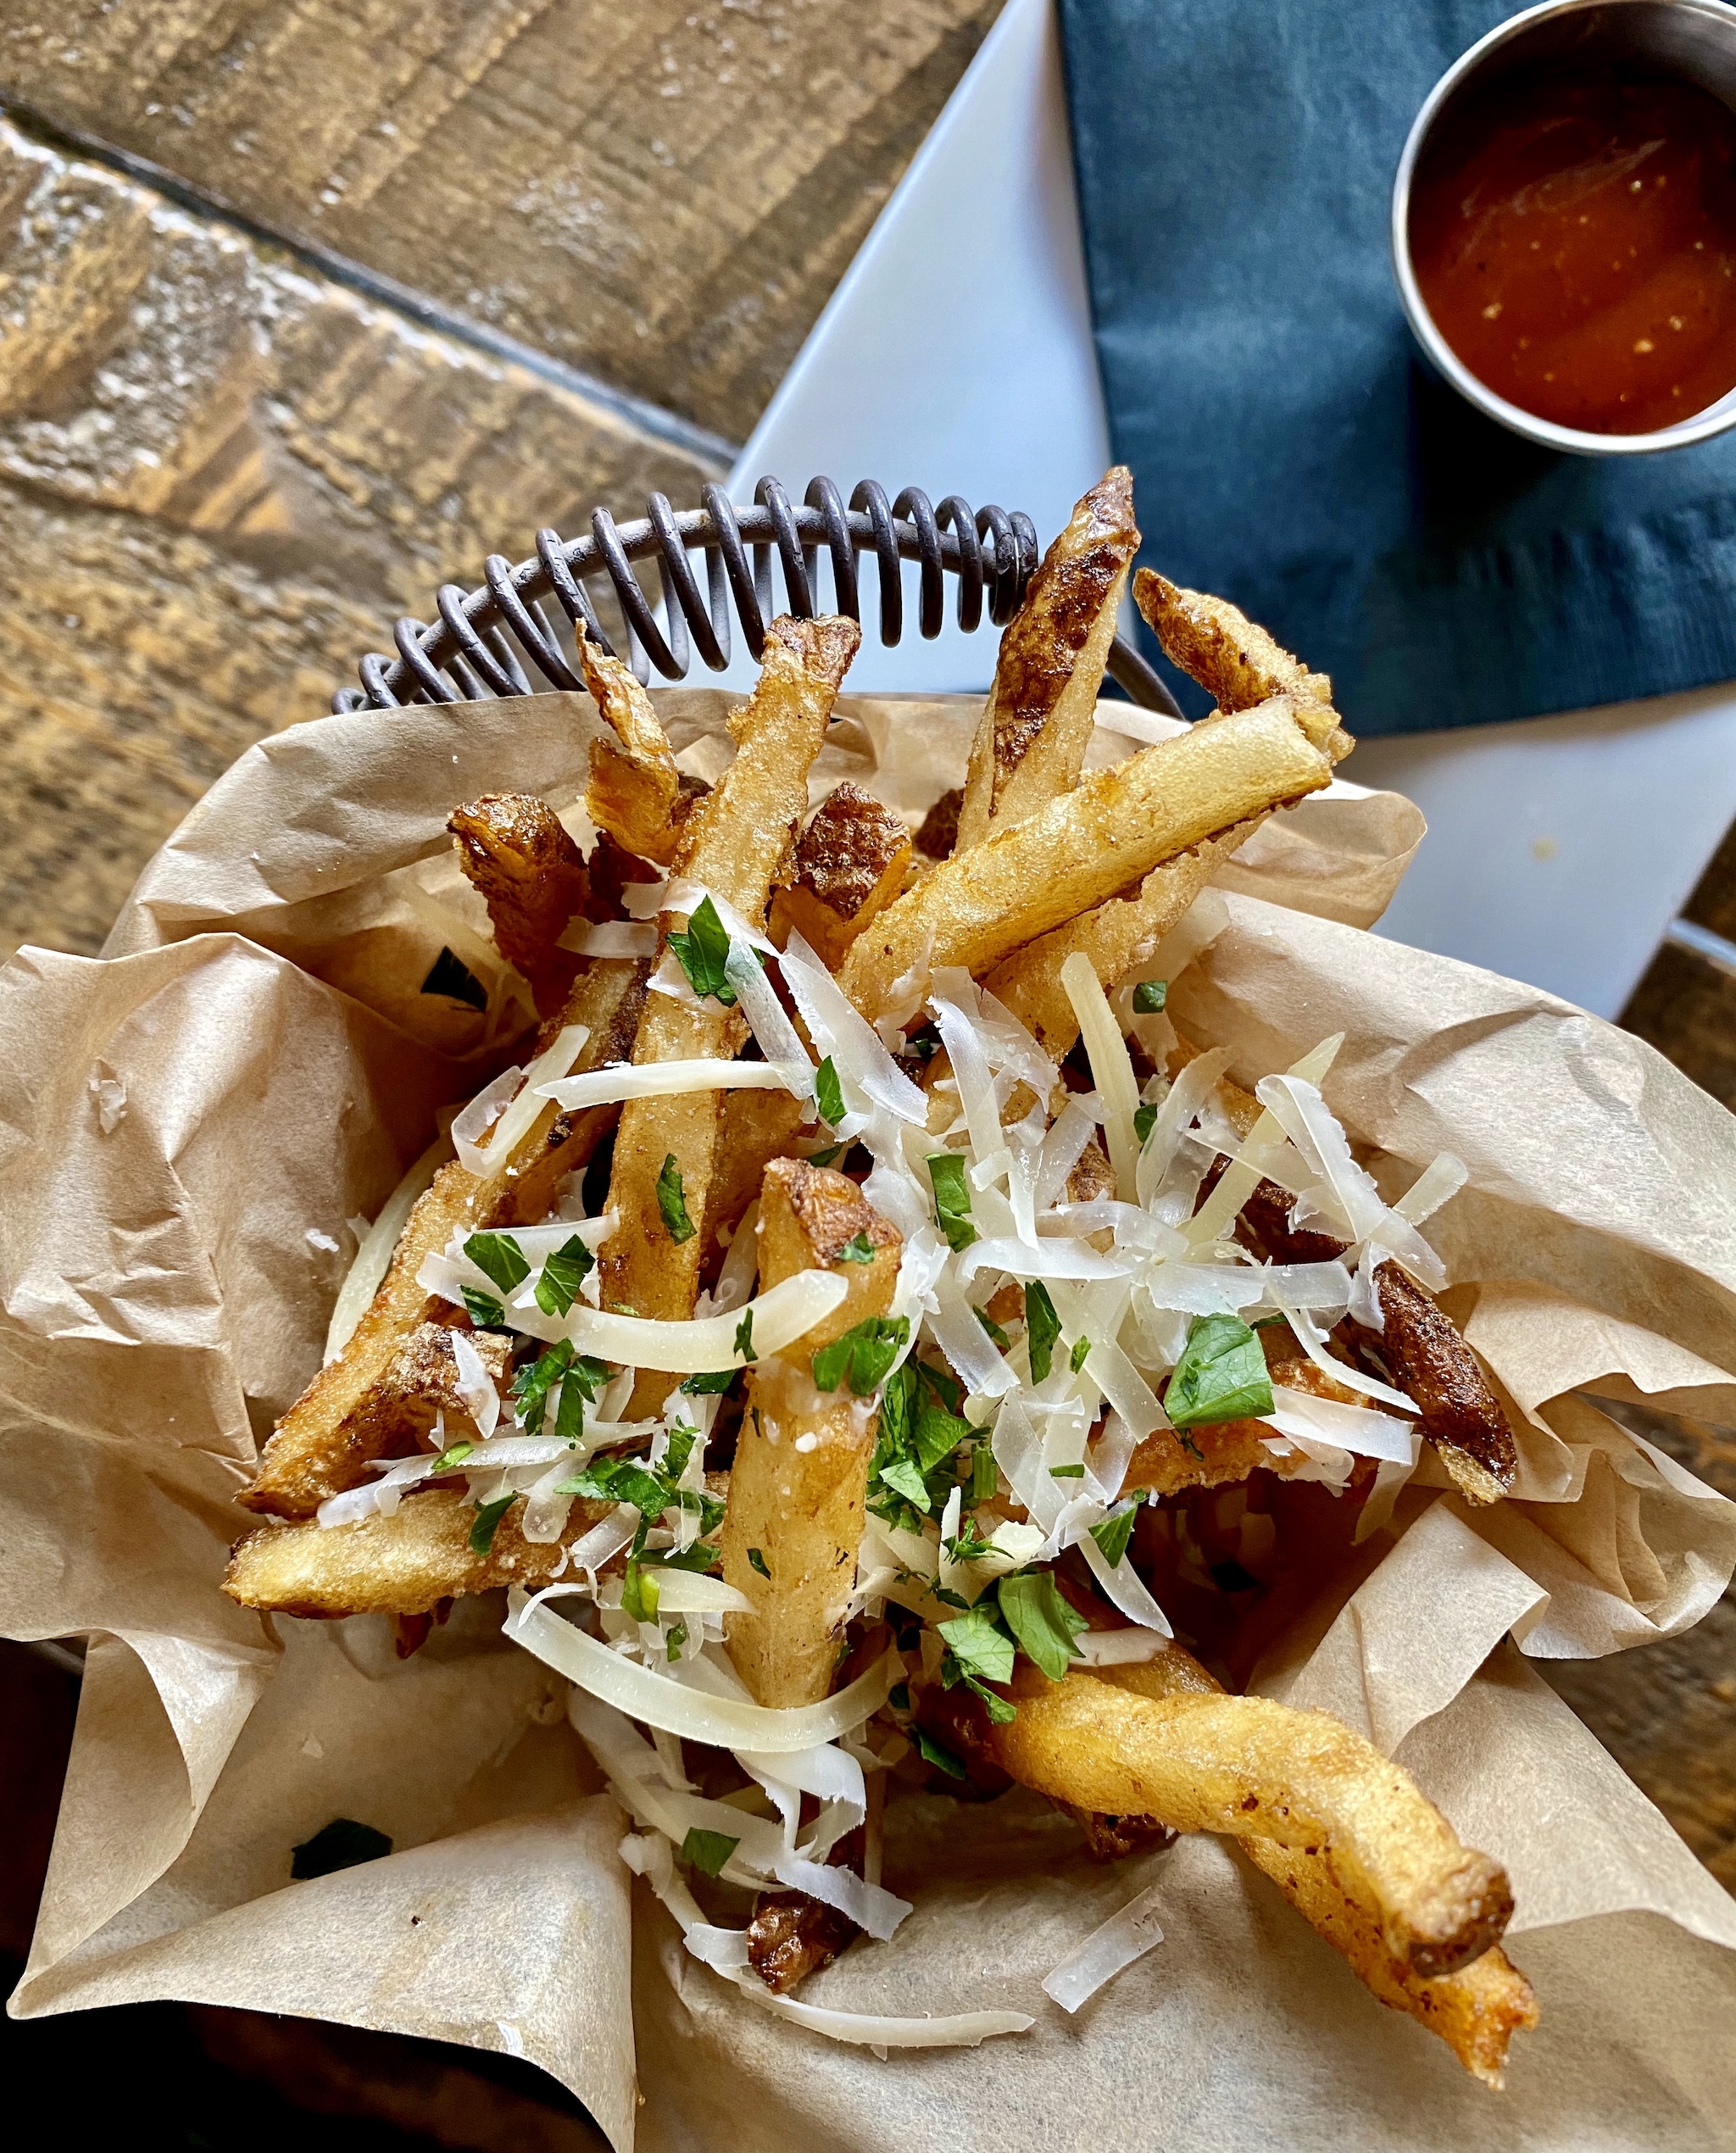 Duck Fries - French Fries Cooked in Duck Fat - parmesan, herbs, tamarind ketchup